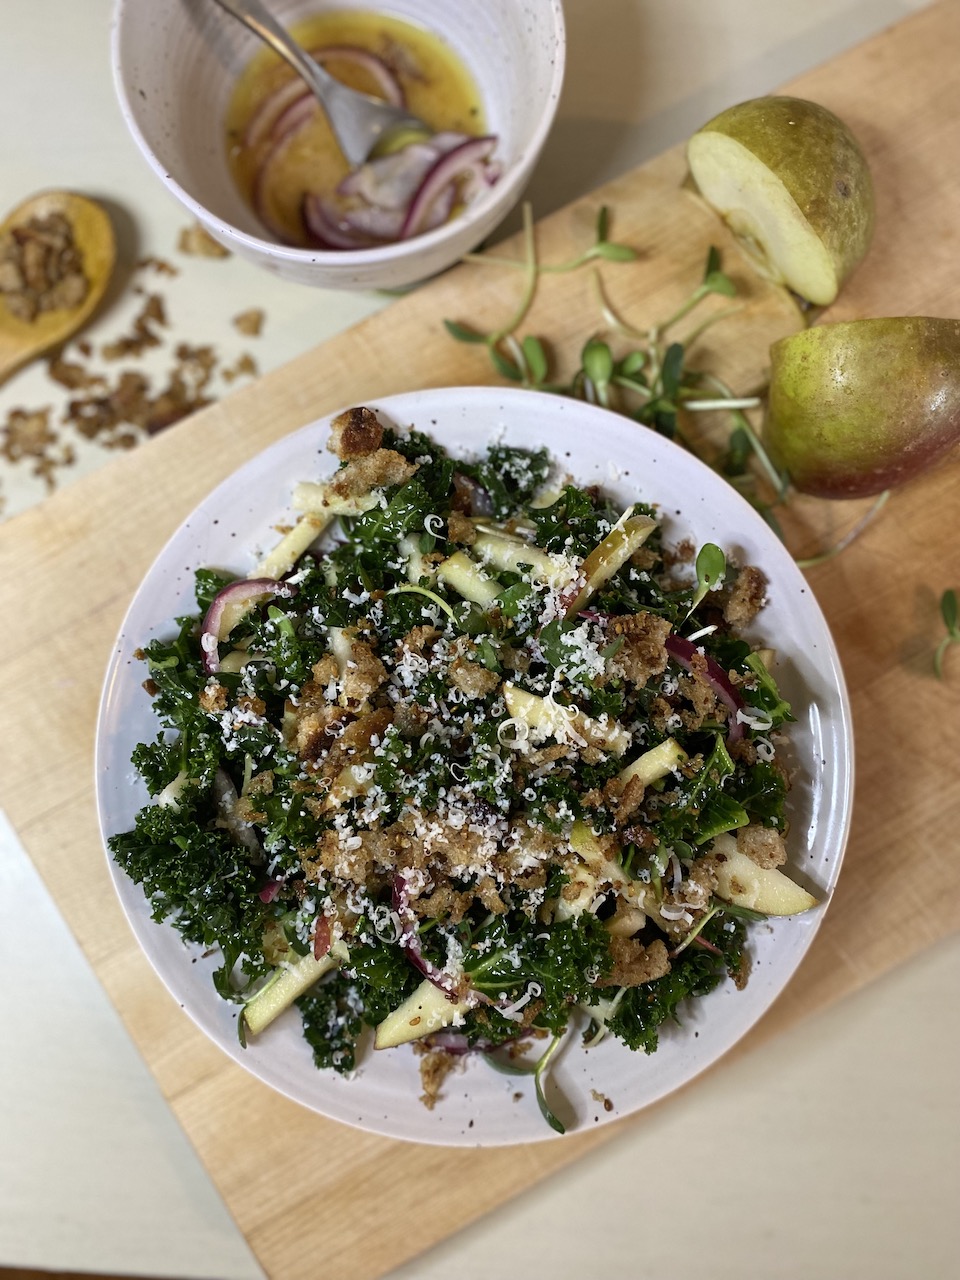 Kale Salad with Apples and Za’atar Breadcrumbs